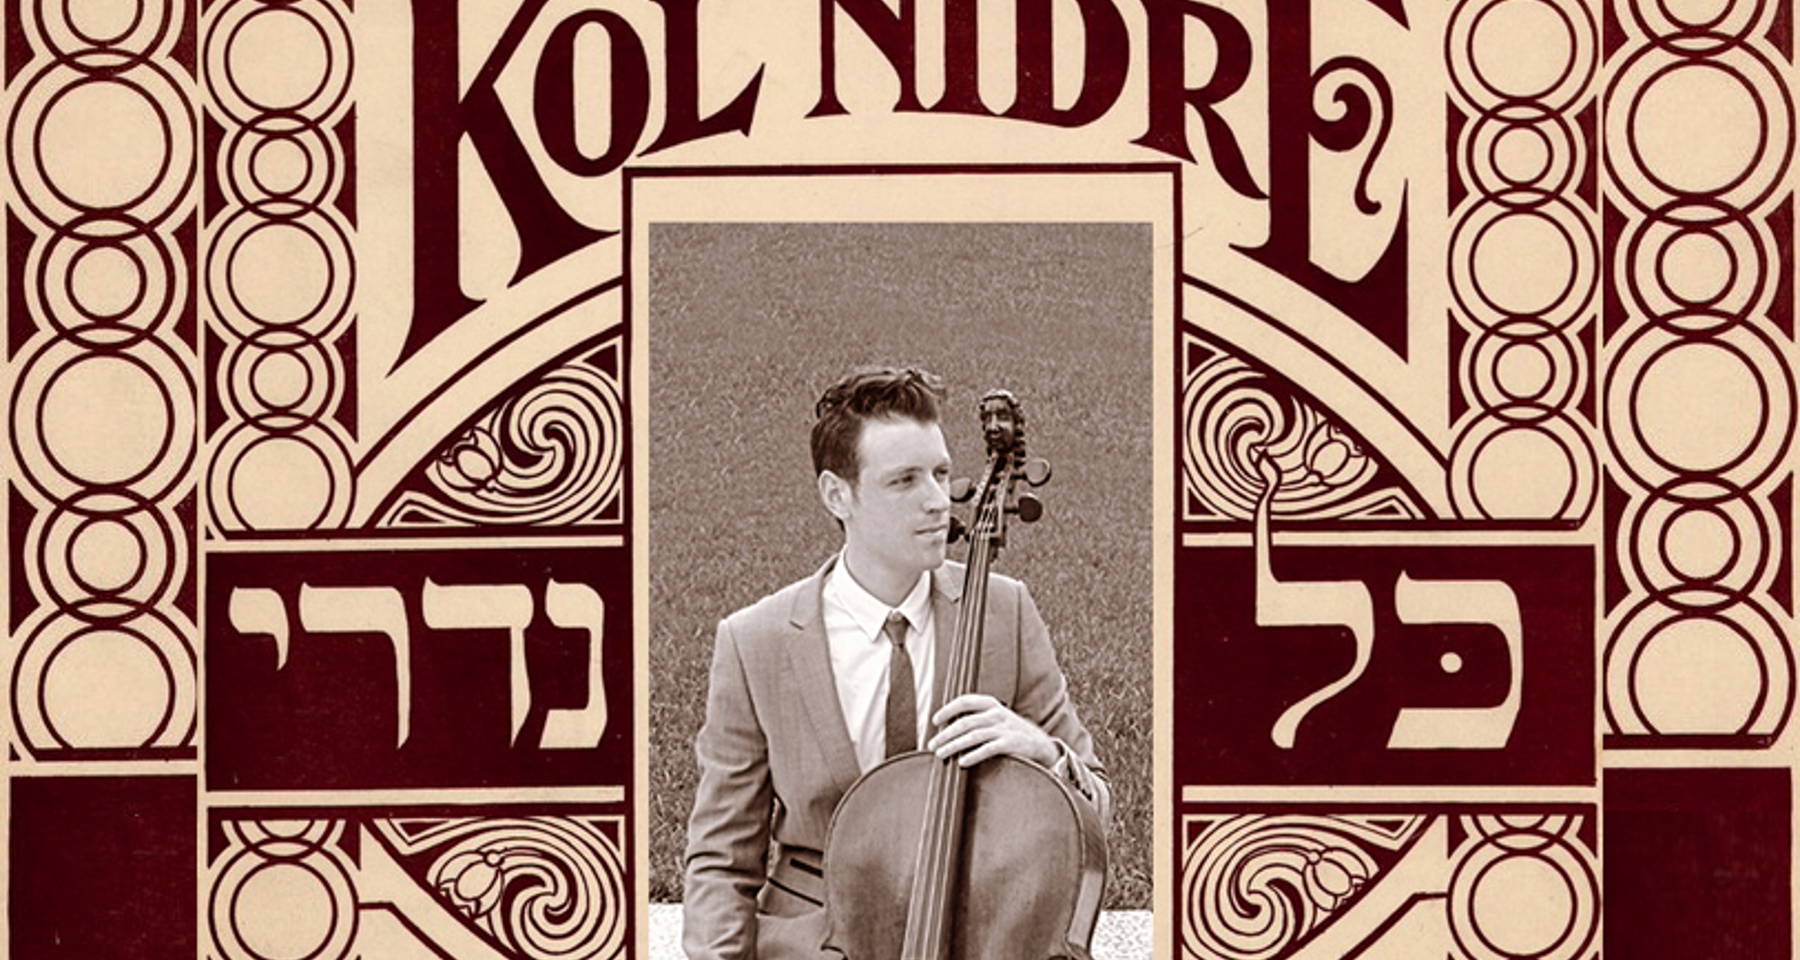 Kol Nidre to Beatles: An Orchestral Experience @ JCC at W 76th st